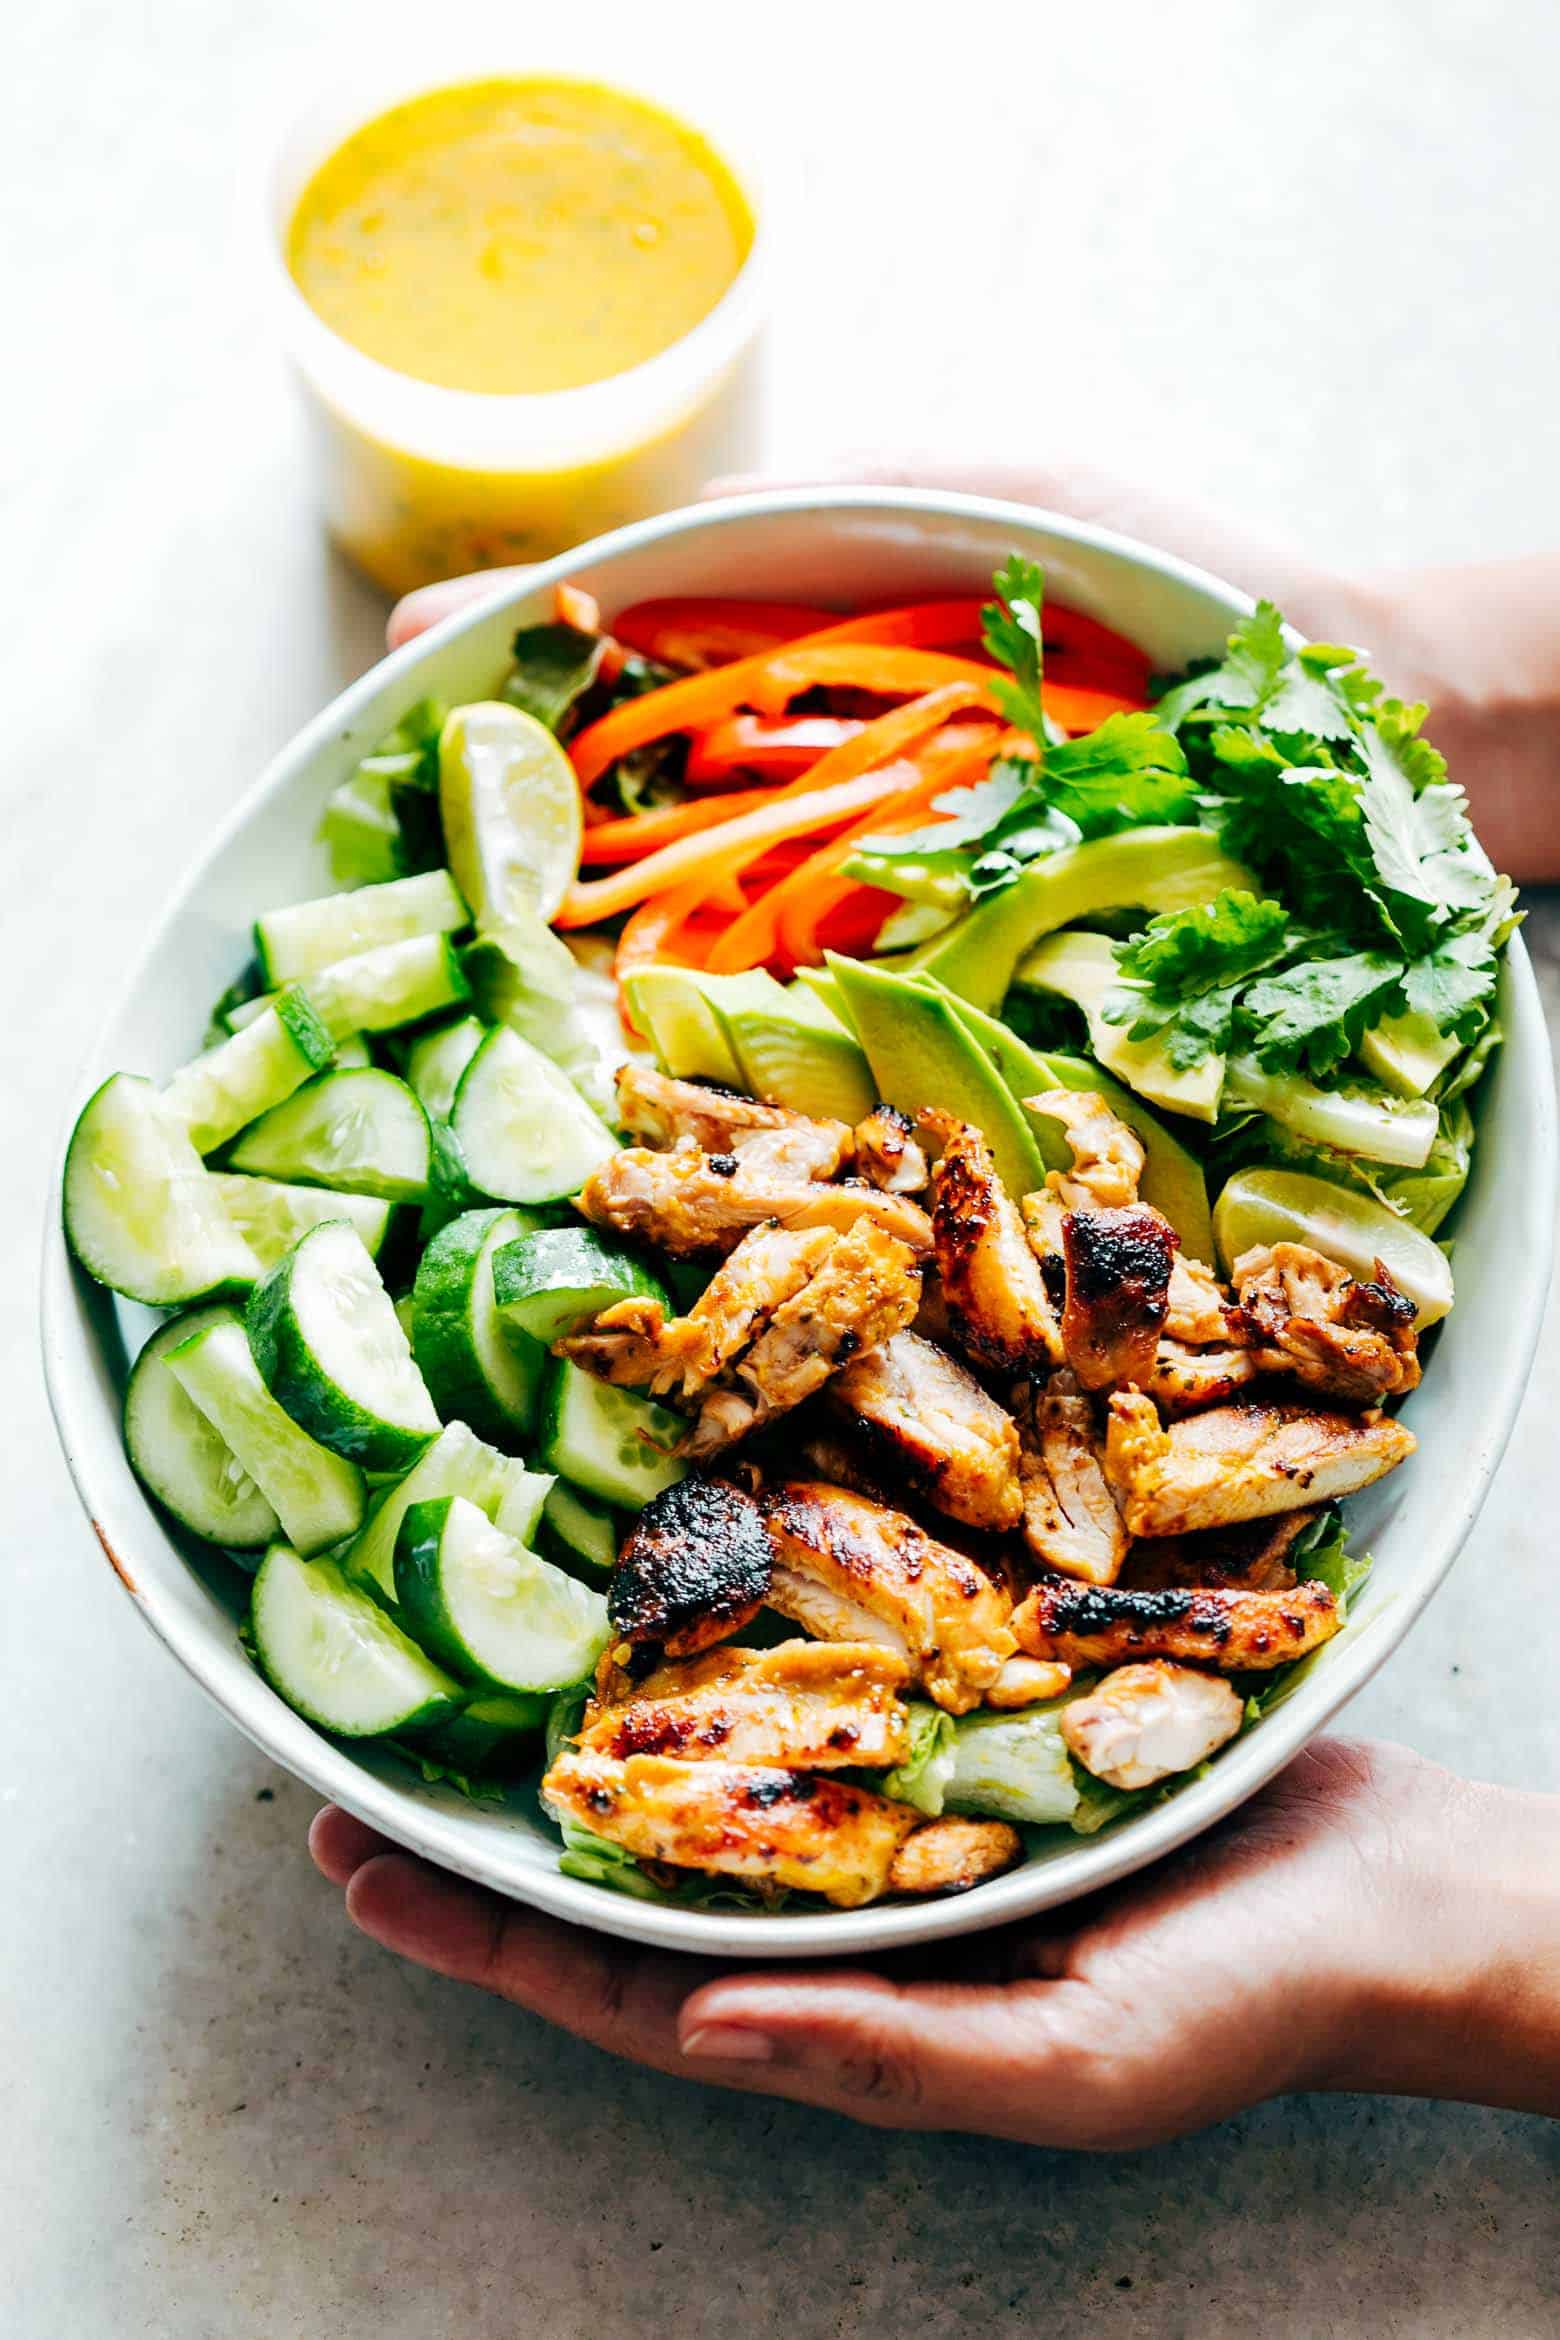 Grilled Chicken Mango Salad with Mango Cilantro Dressing is loaded with cucumbers, peppers, avocado and has a crazy good dressing that doubles up as a marinade! Uses barbecued and grilled chicken and an easy dressing. Gluten Free, Paleo, Dairy Free, Healthy. Best summer salad ever!